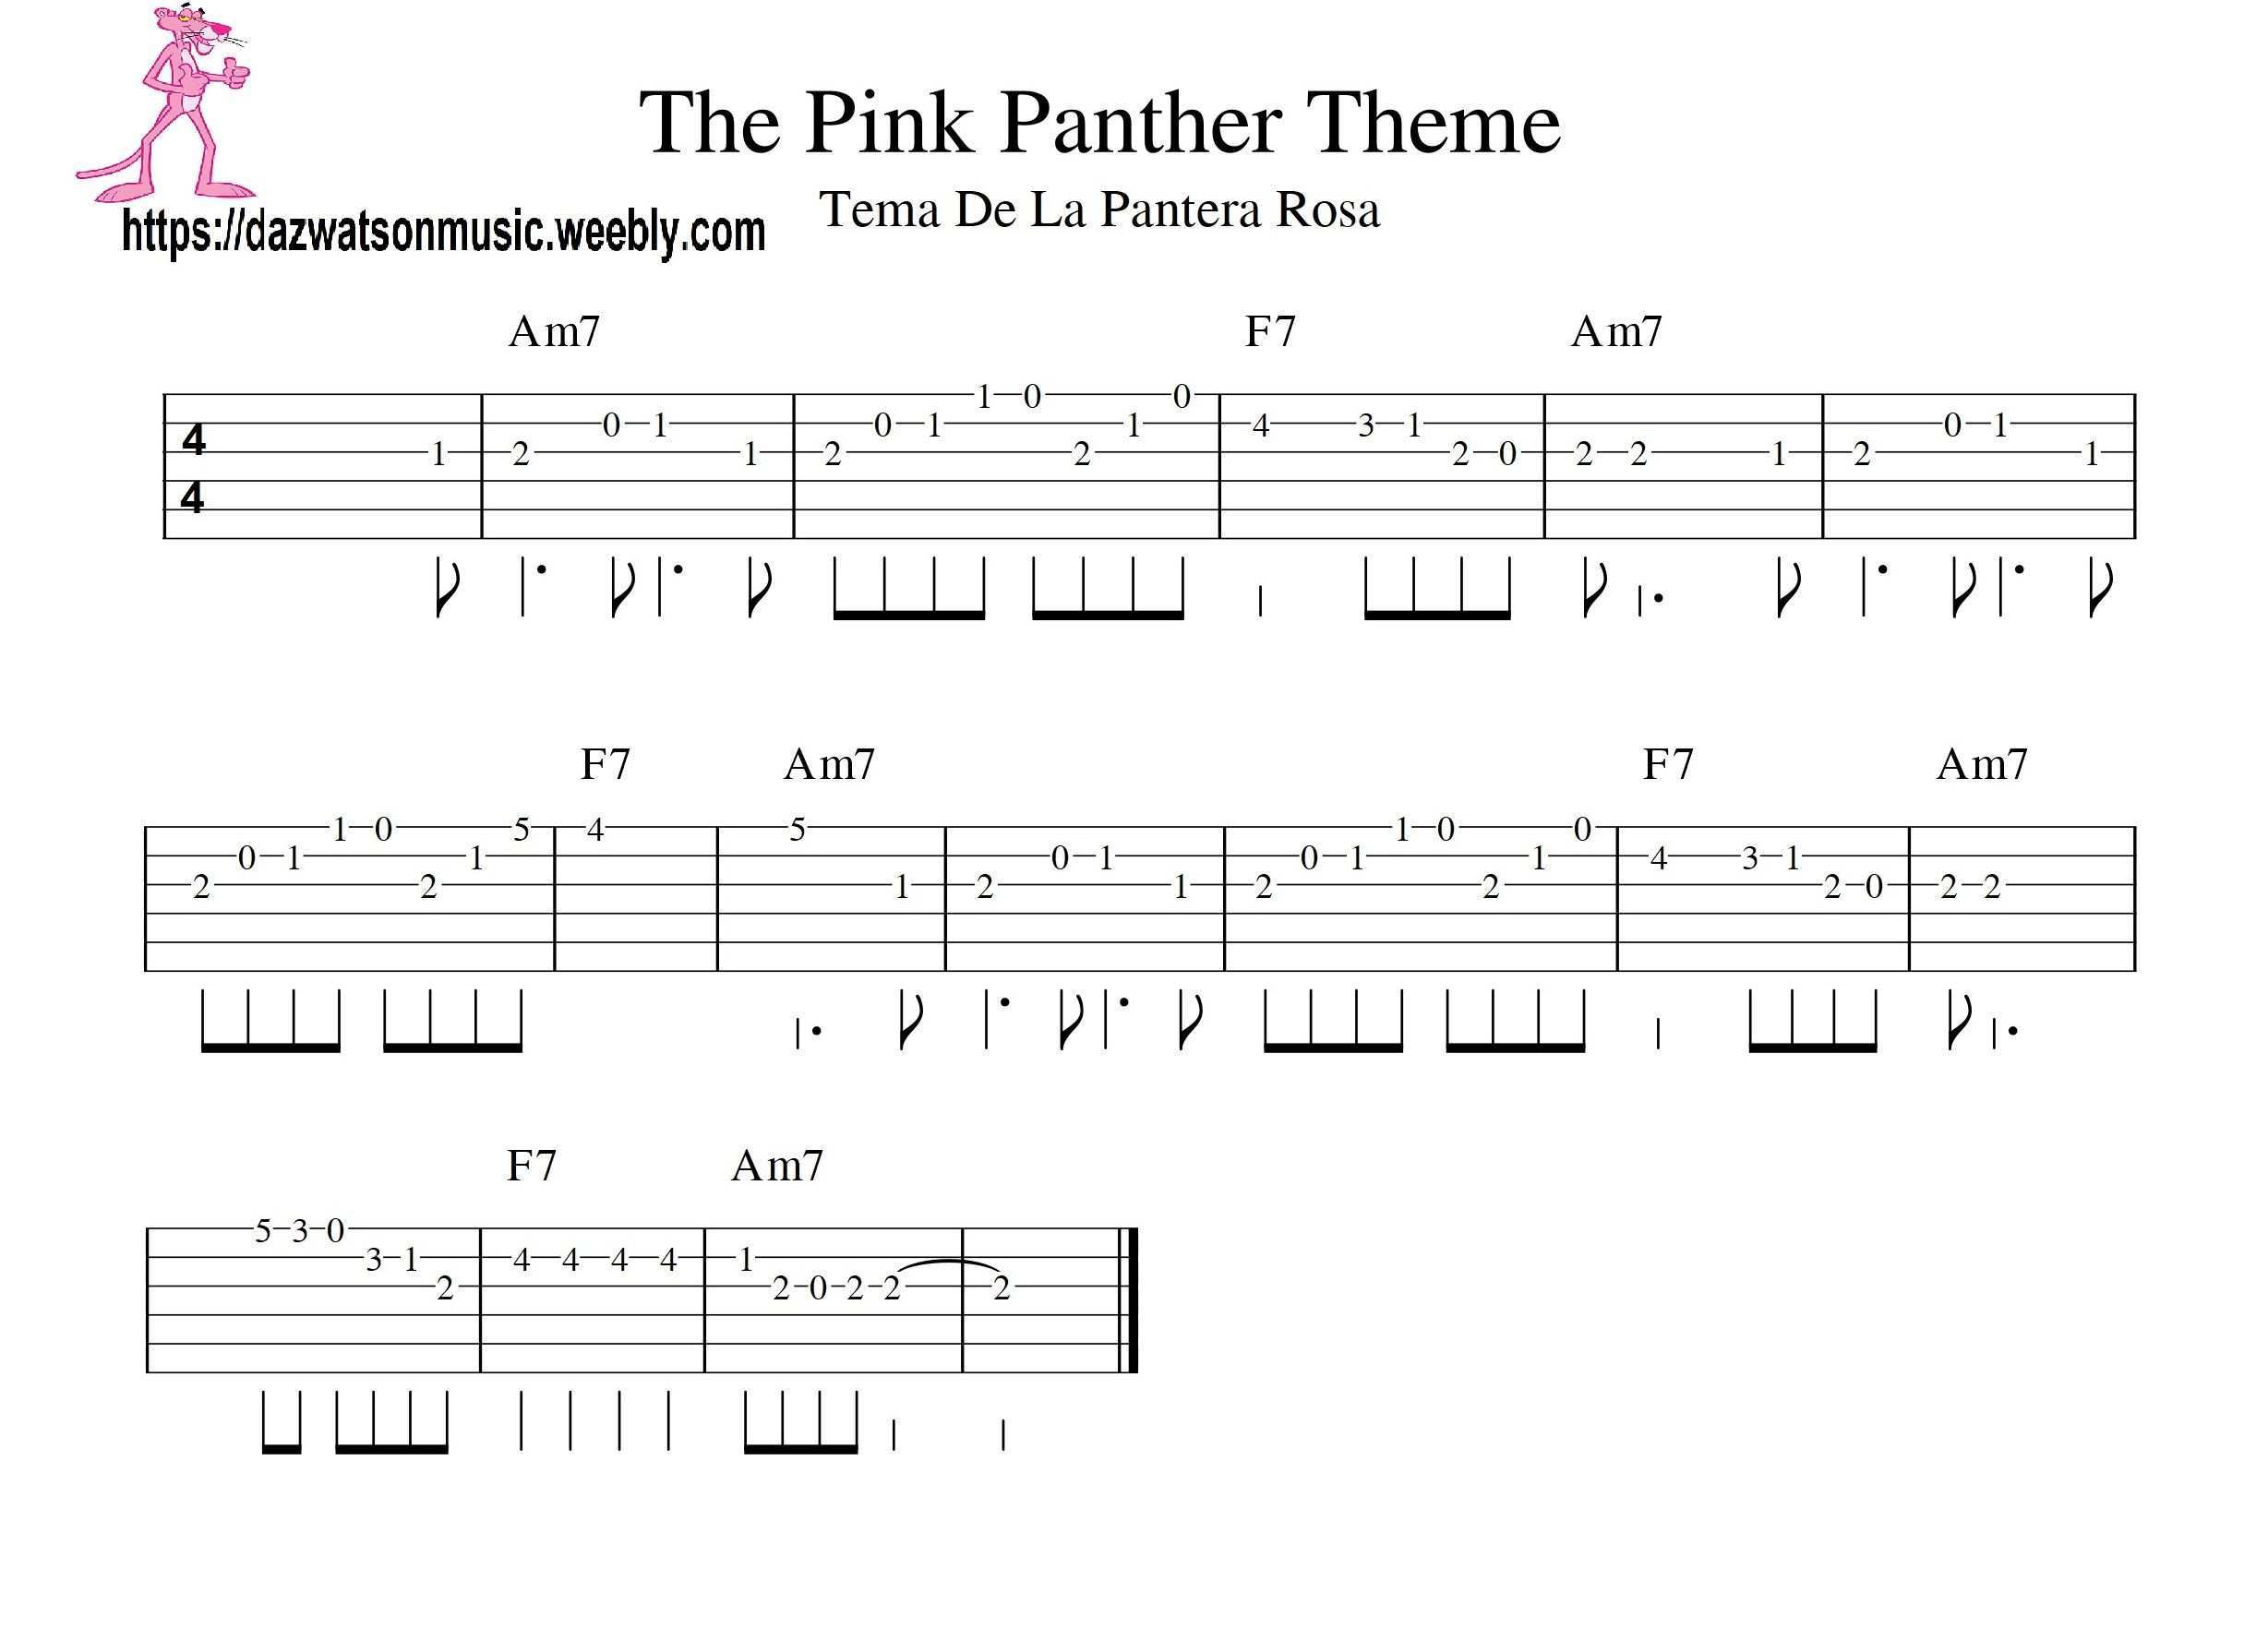 The Pink Panther Theme Tune Easy Guitar Tab Guitar Tabs Songs Guitar Tabs Acoustic Easy Guitar Songs